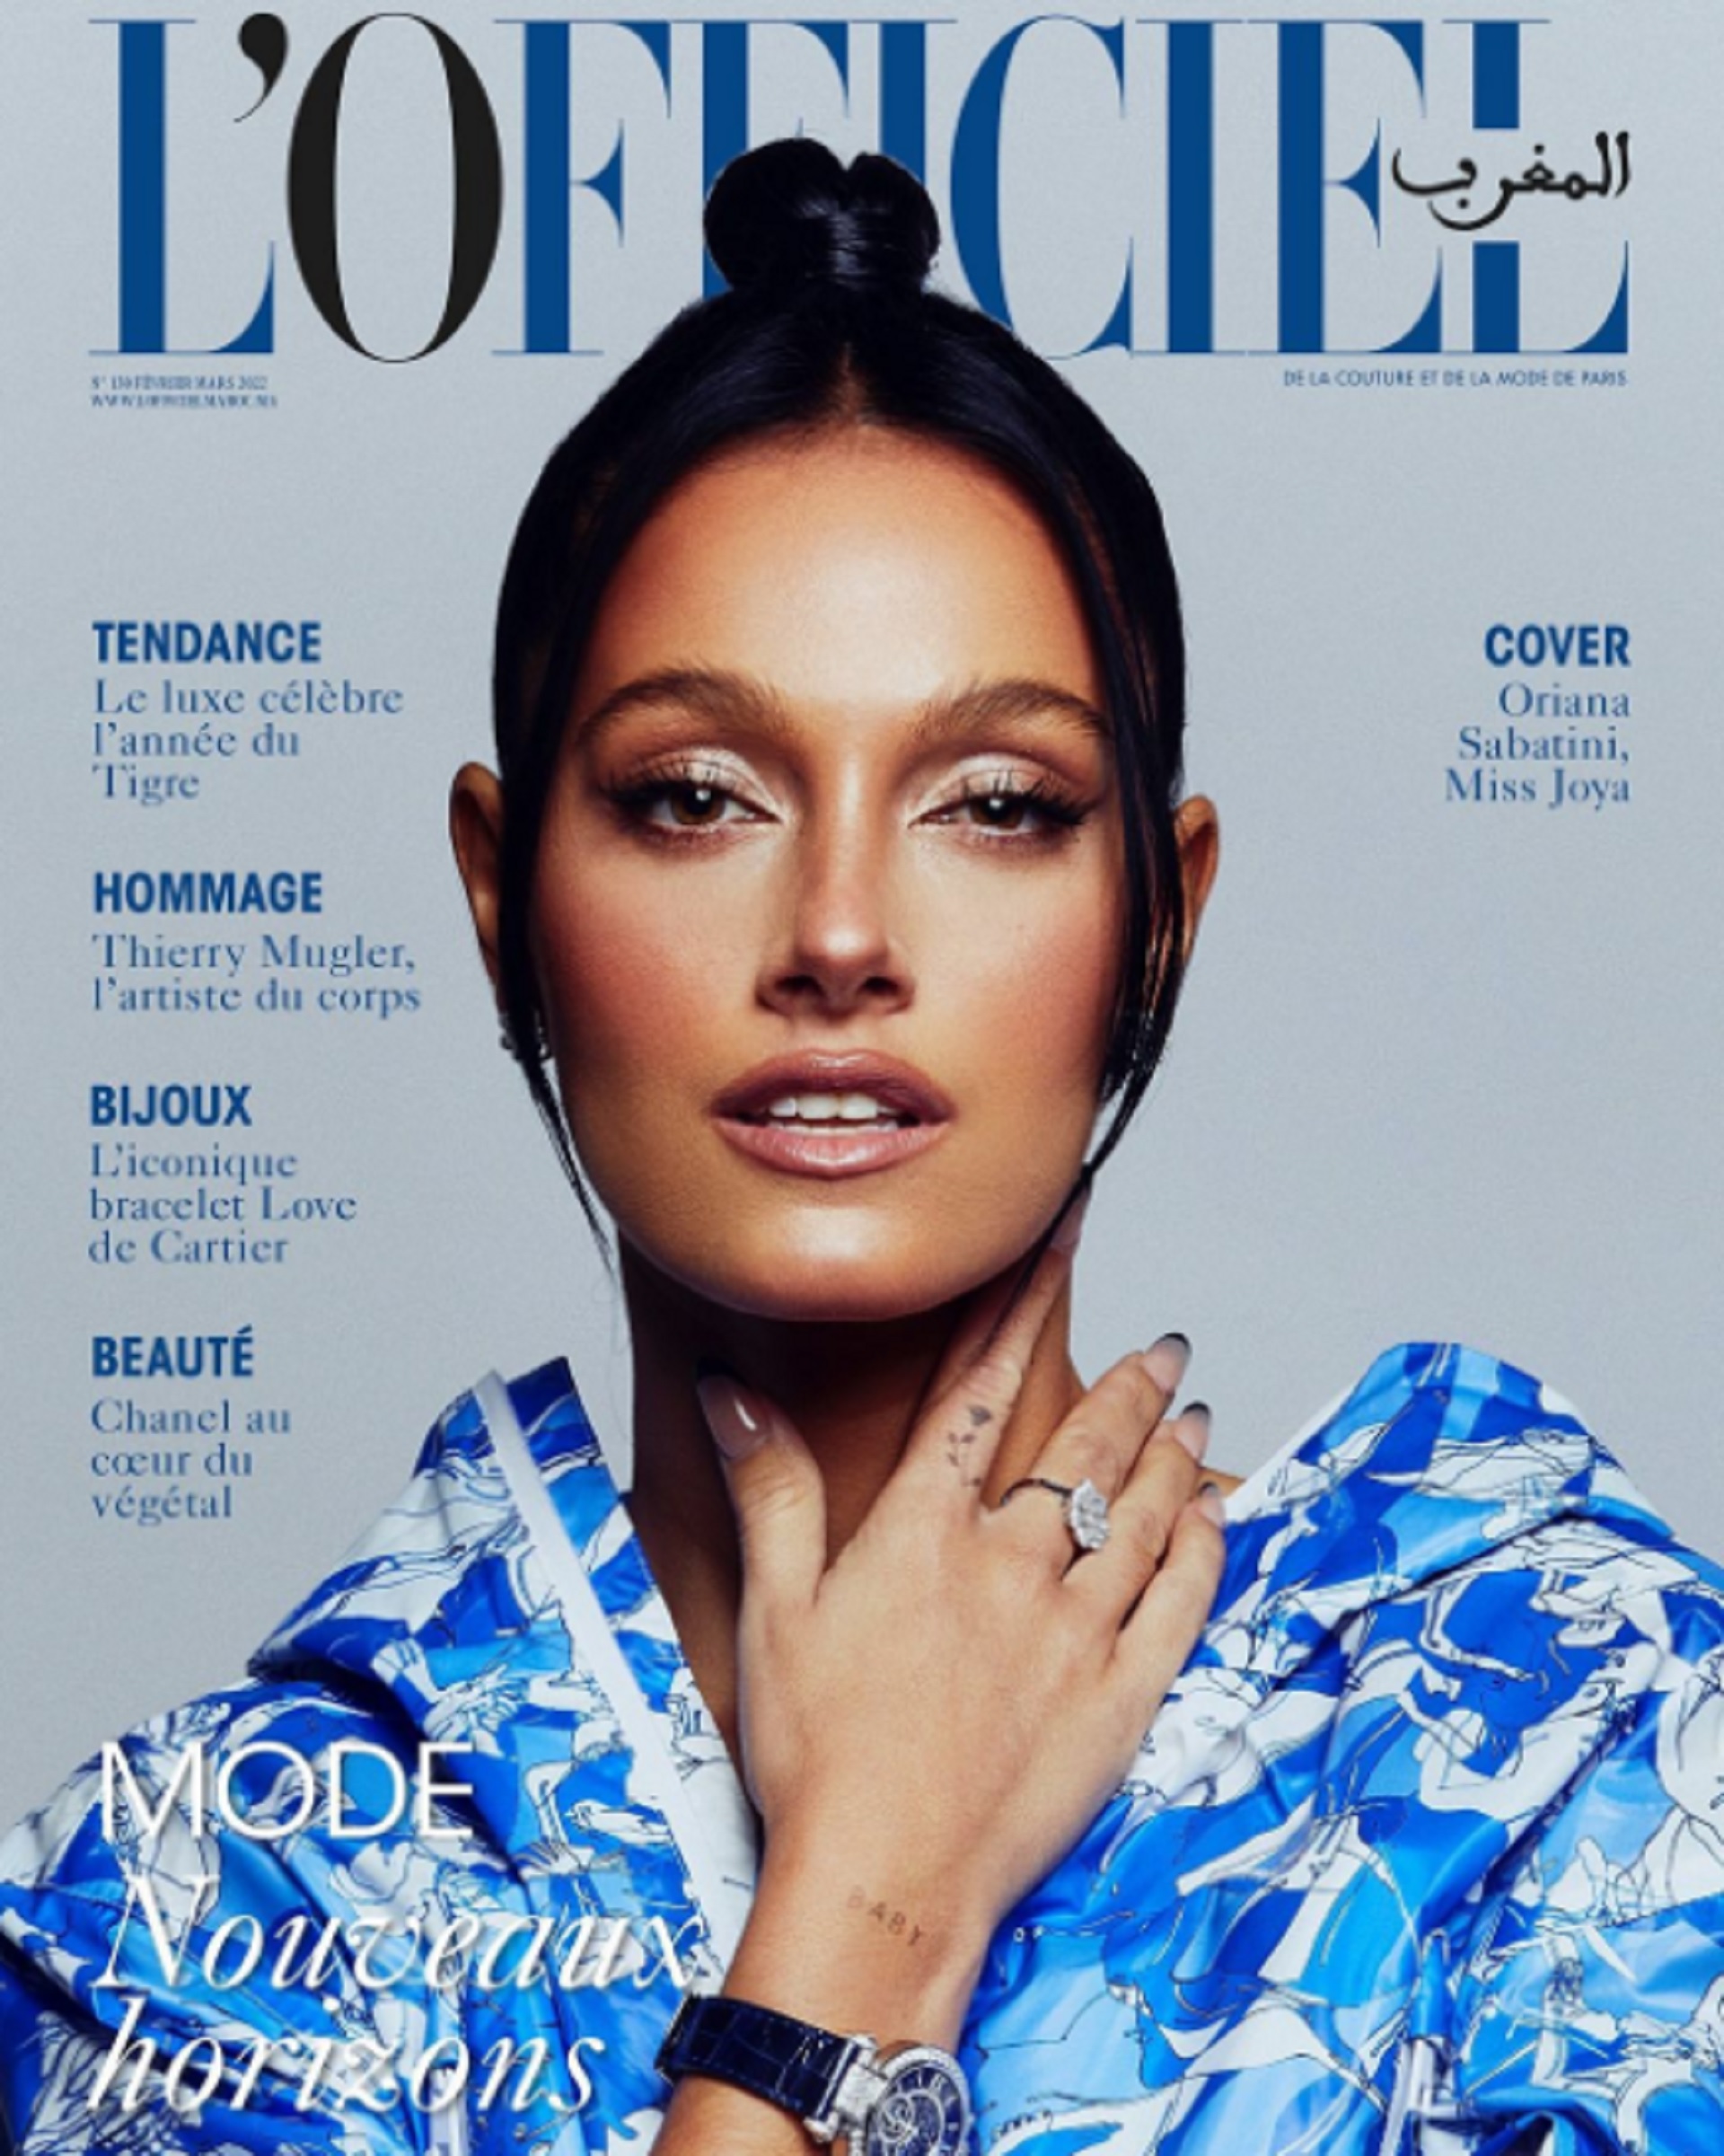 The latest issue of L'Officiel magazine with Oriana Sabatini on the cover (Nicolas Gerardin)